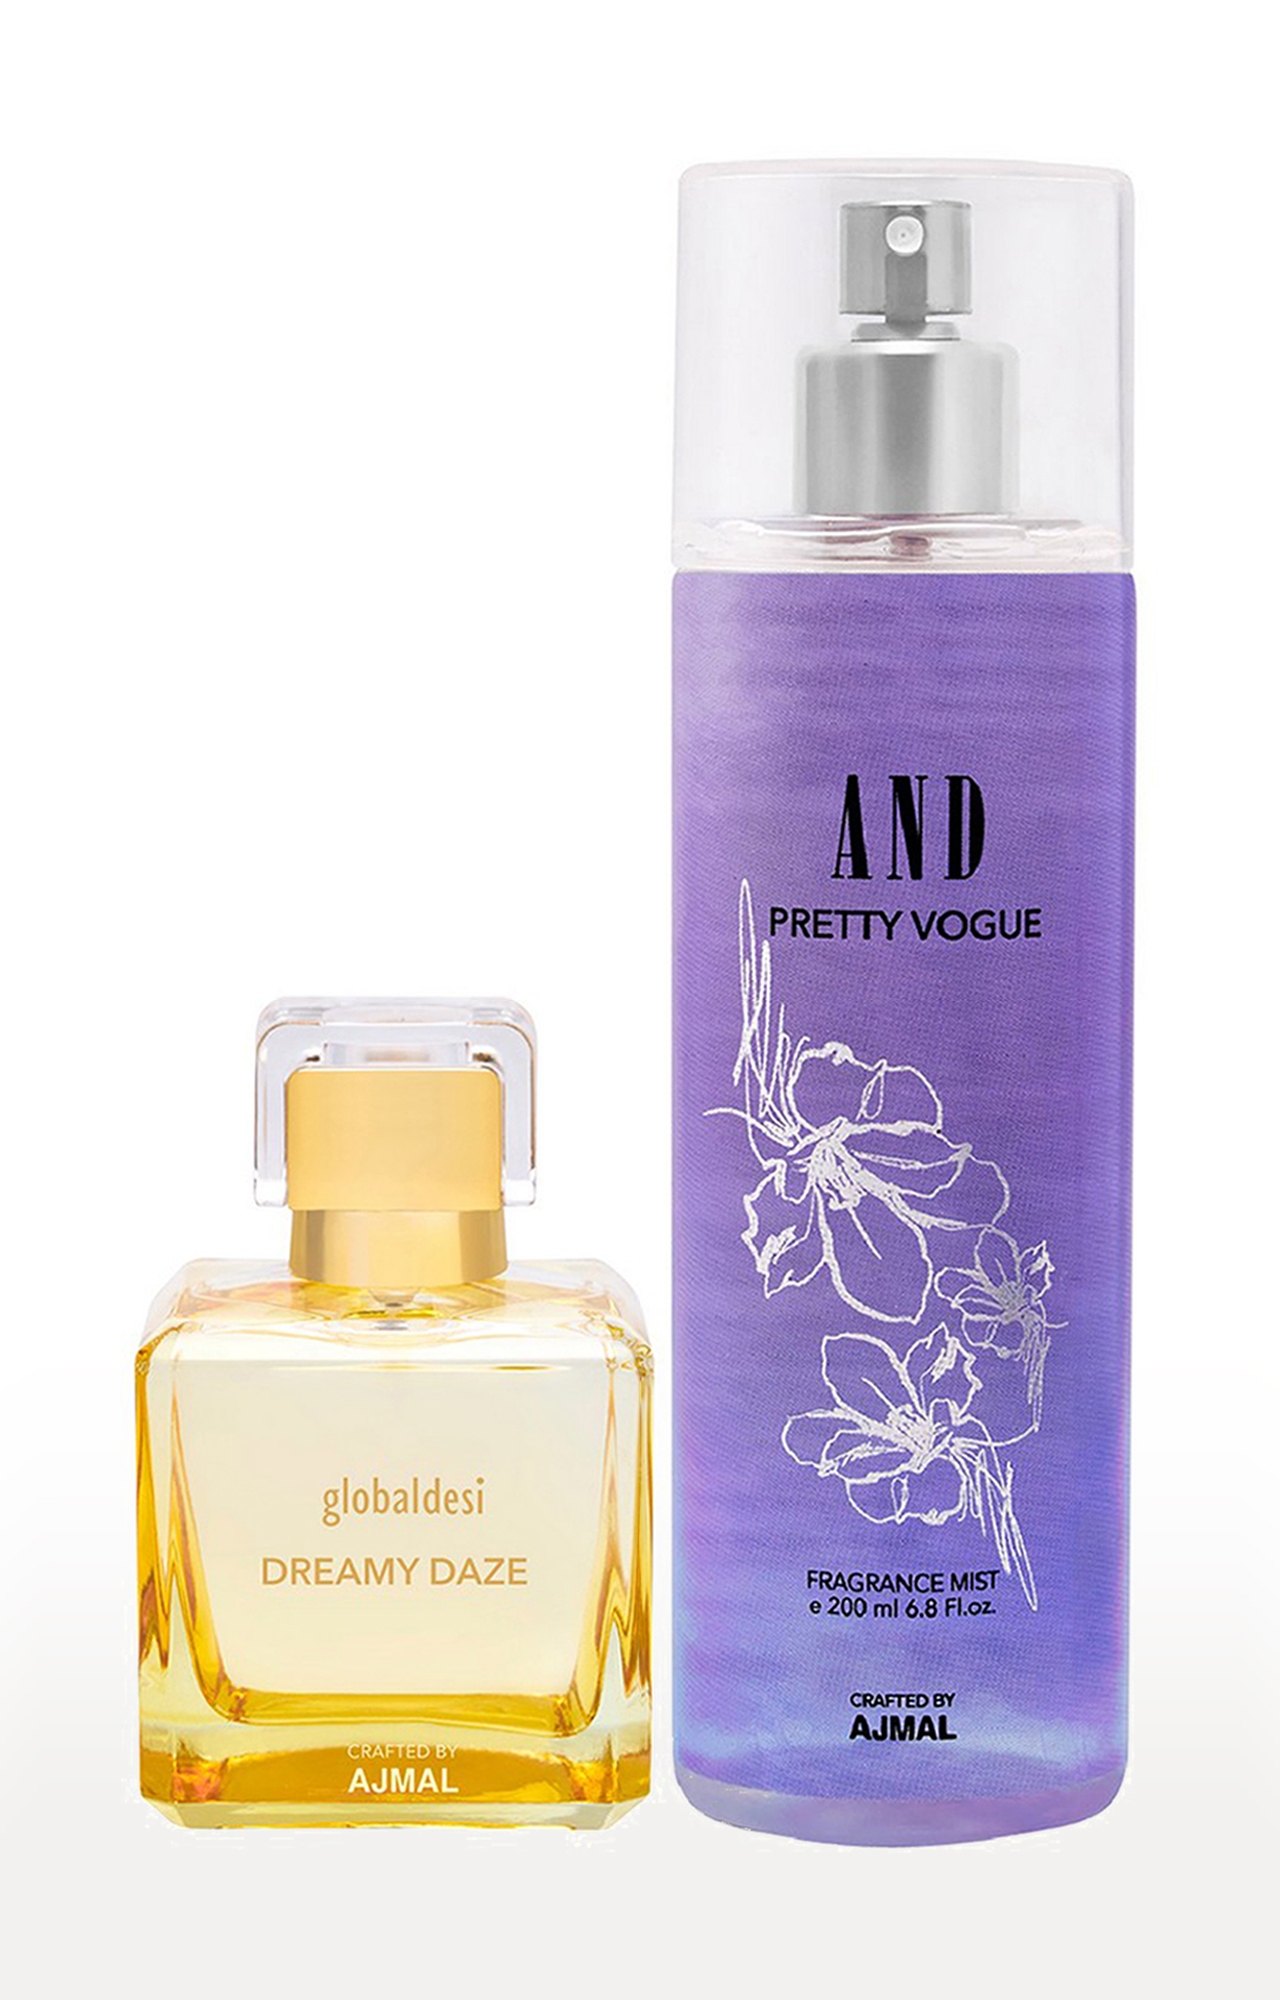 AND Crafted By Ajmal | Global Desi Dreamy Daze EDP 50ML & AND Pretty Vogue Body Mist 200ML  0